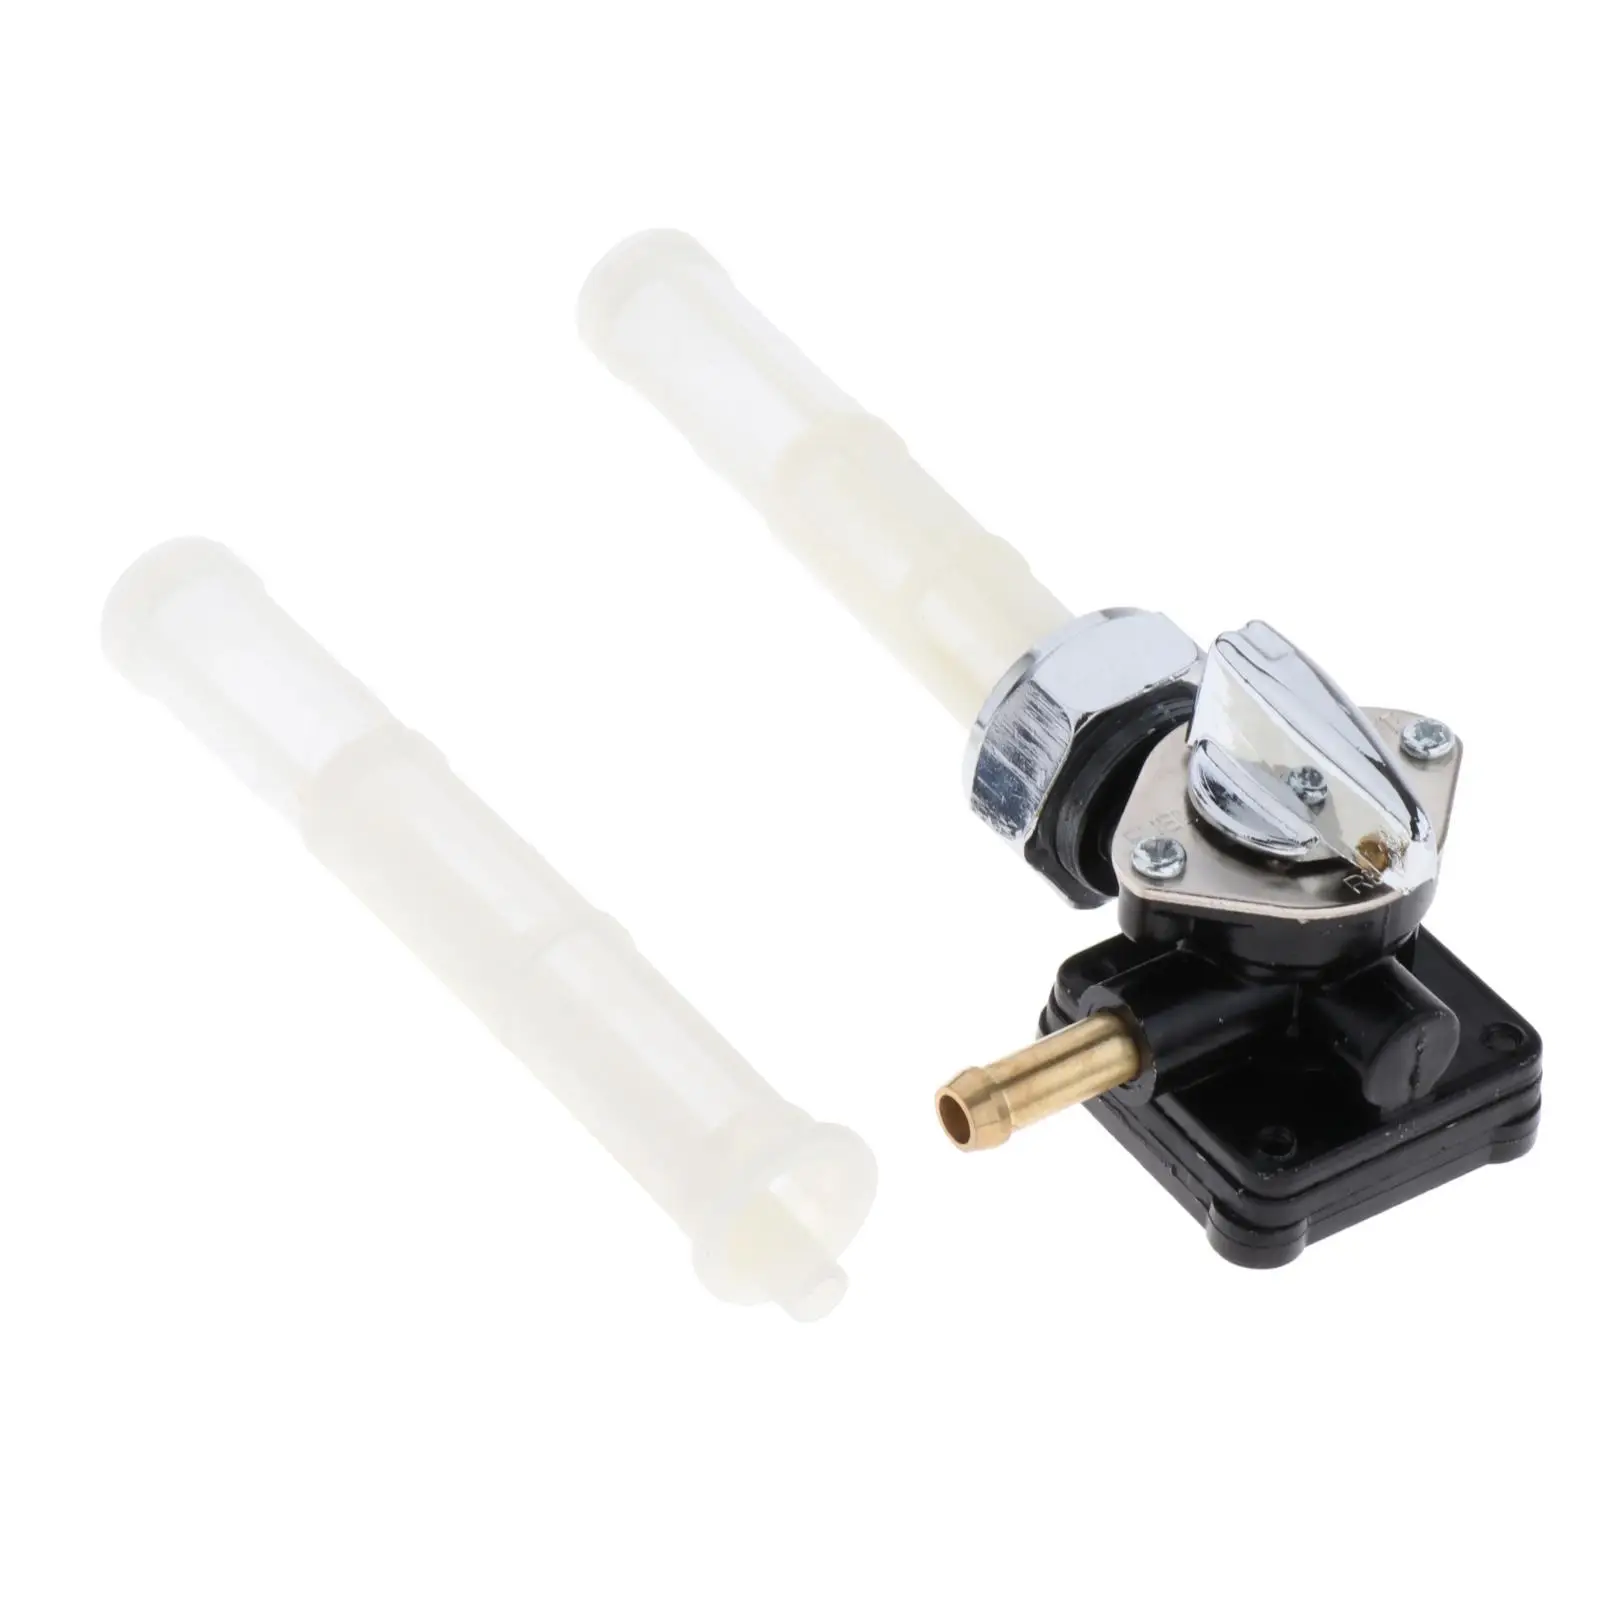 Motorcycle Fuel Valve Petcock with Male Thread Gas Shut Off Switch for Flst FLT Fxst Replace Motorcycle Supplies